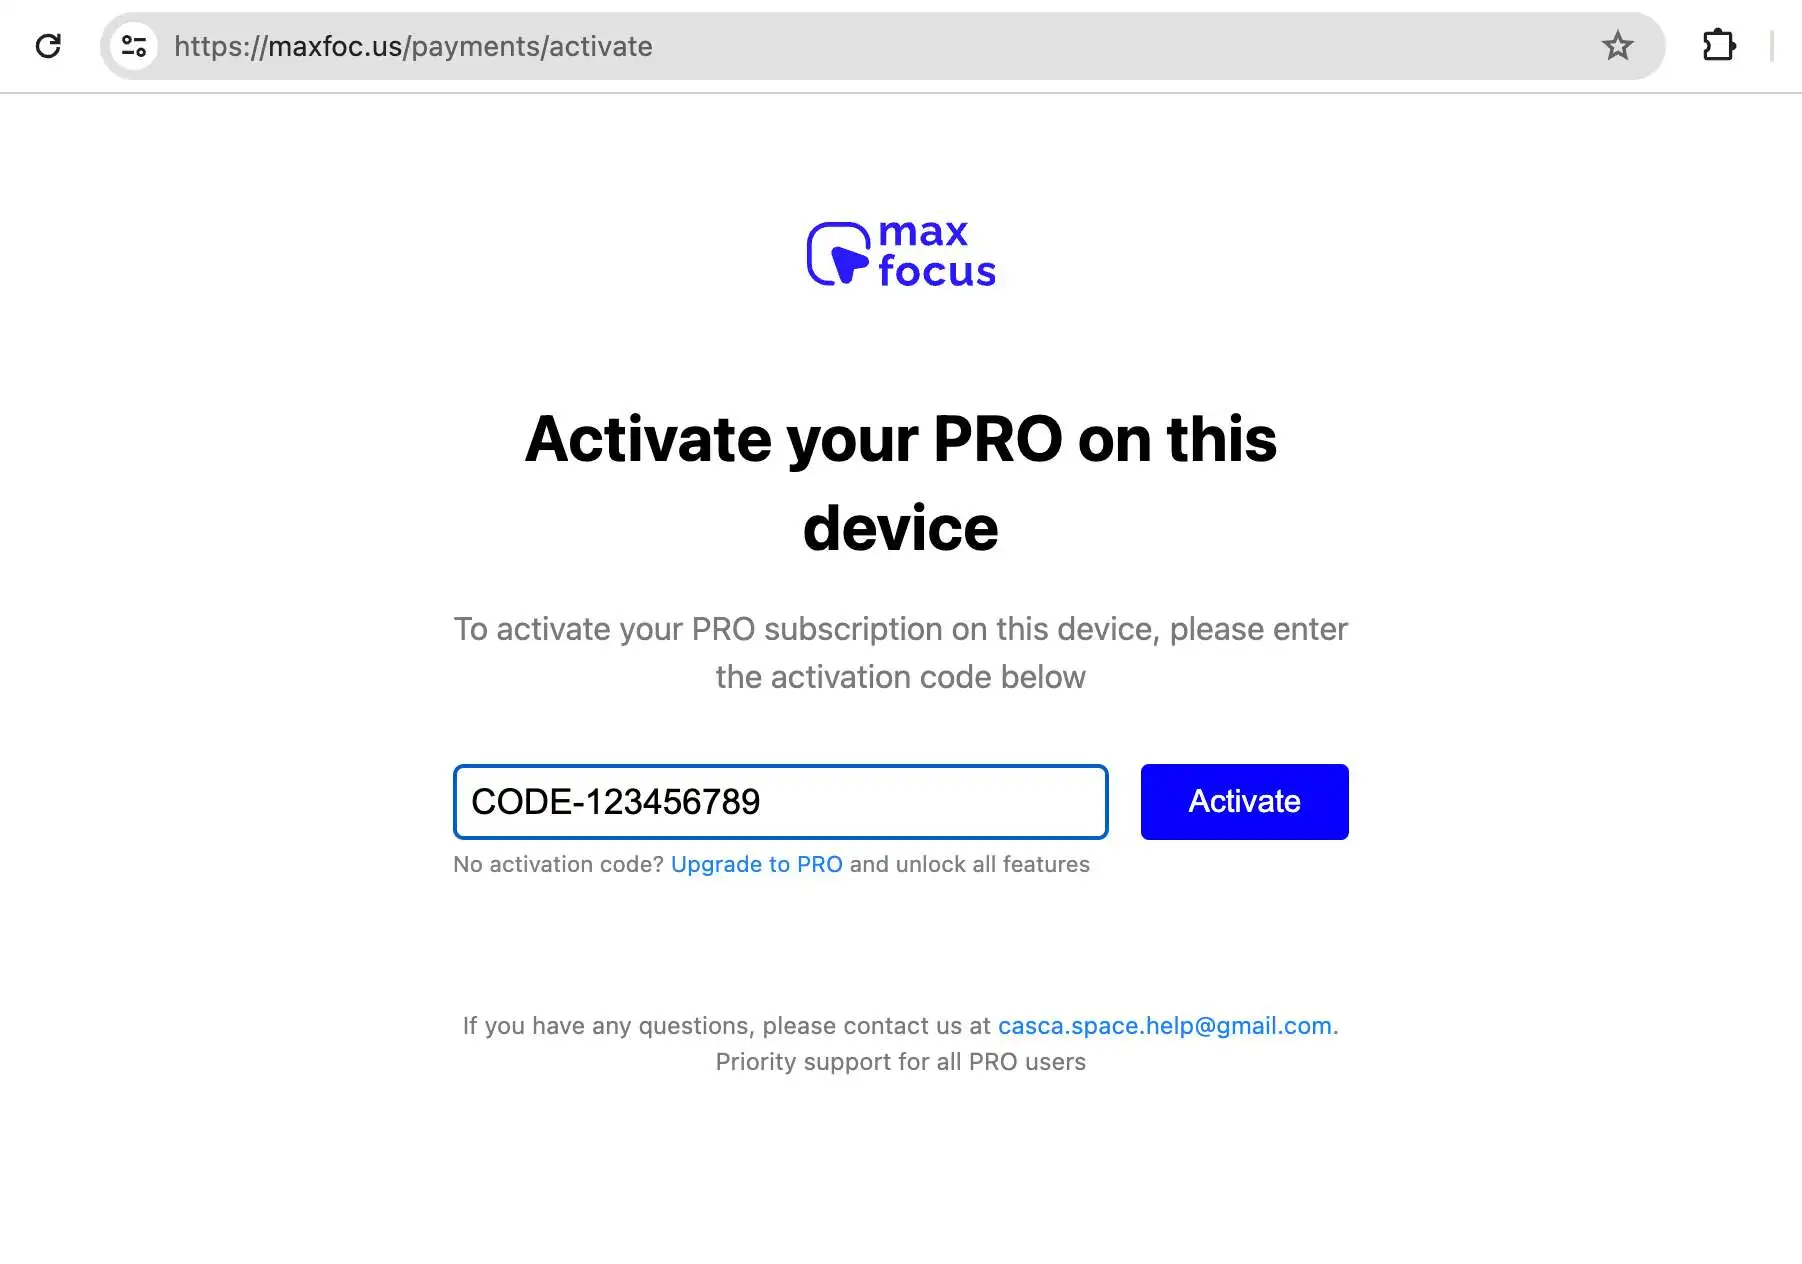 Activation Page